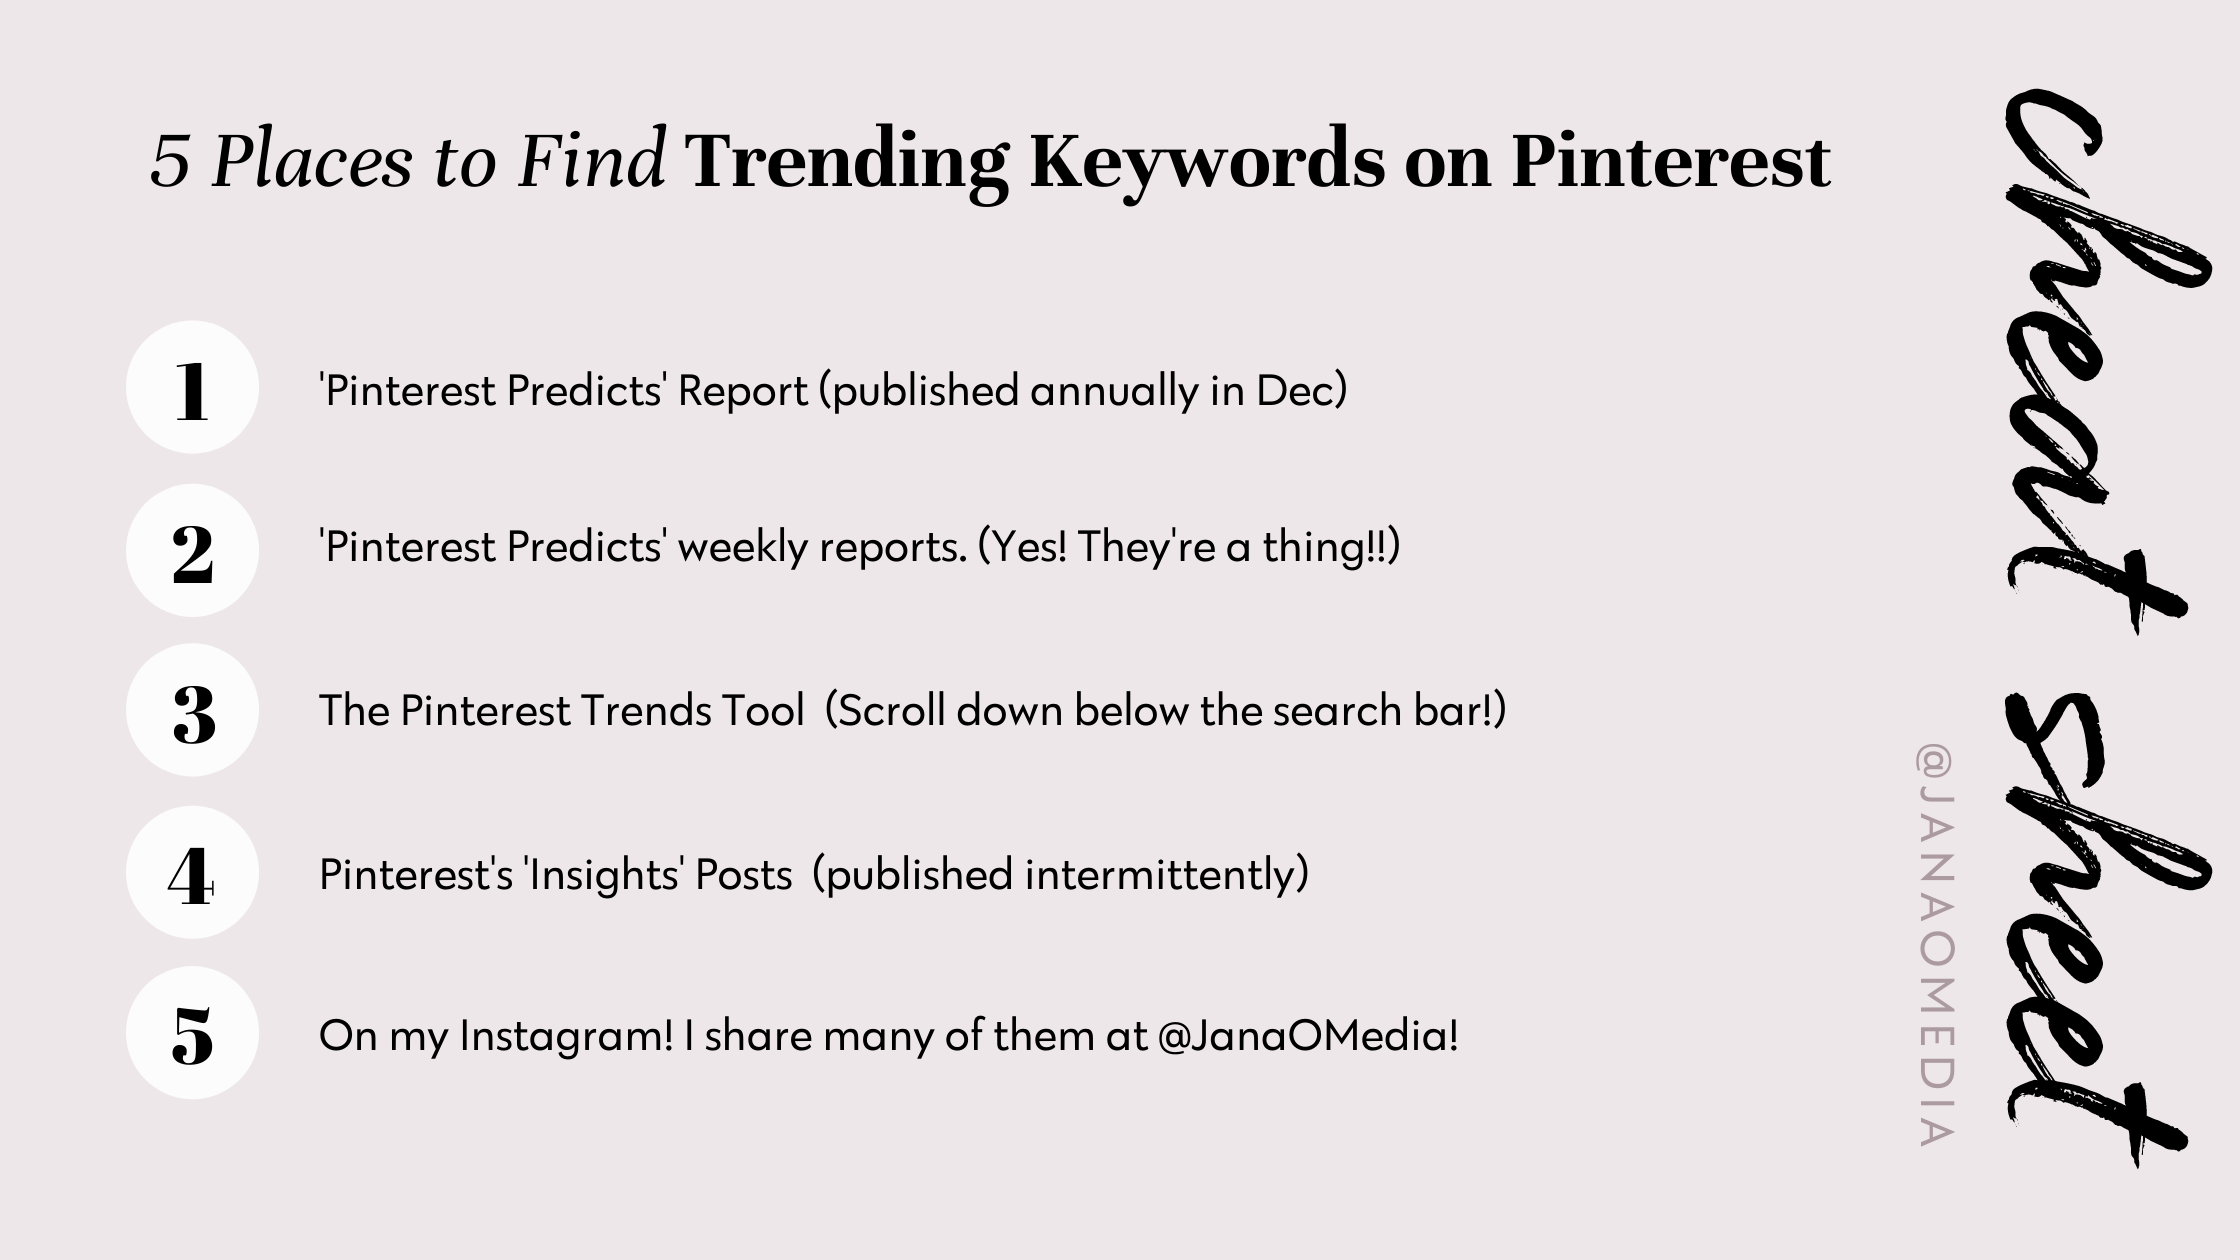 5 Places to Find Trending Keywords on Pinterest